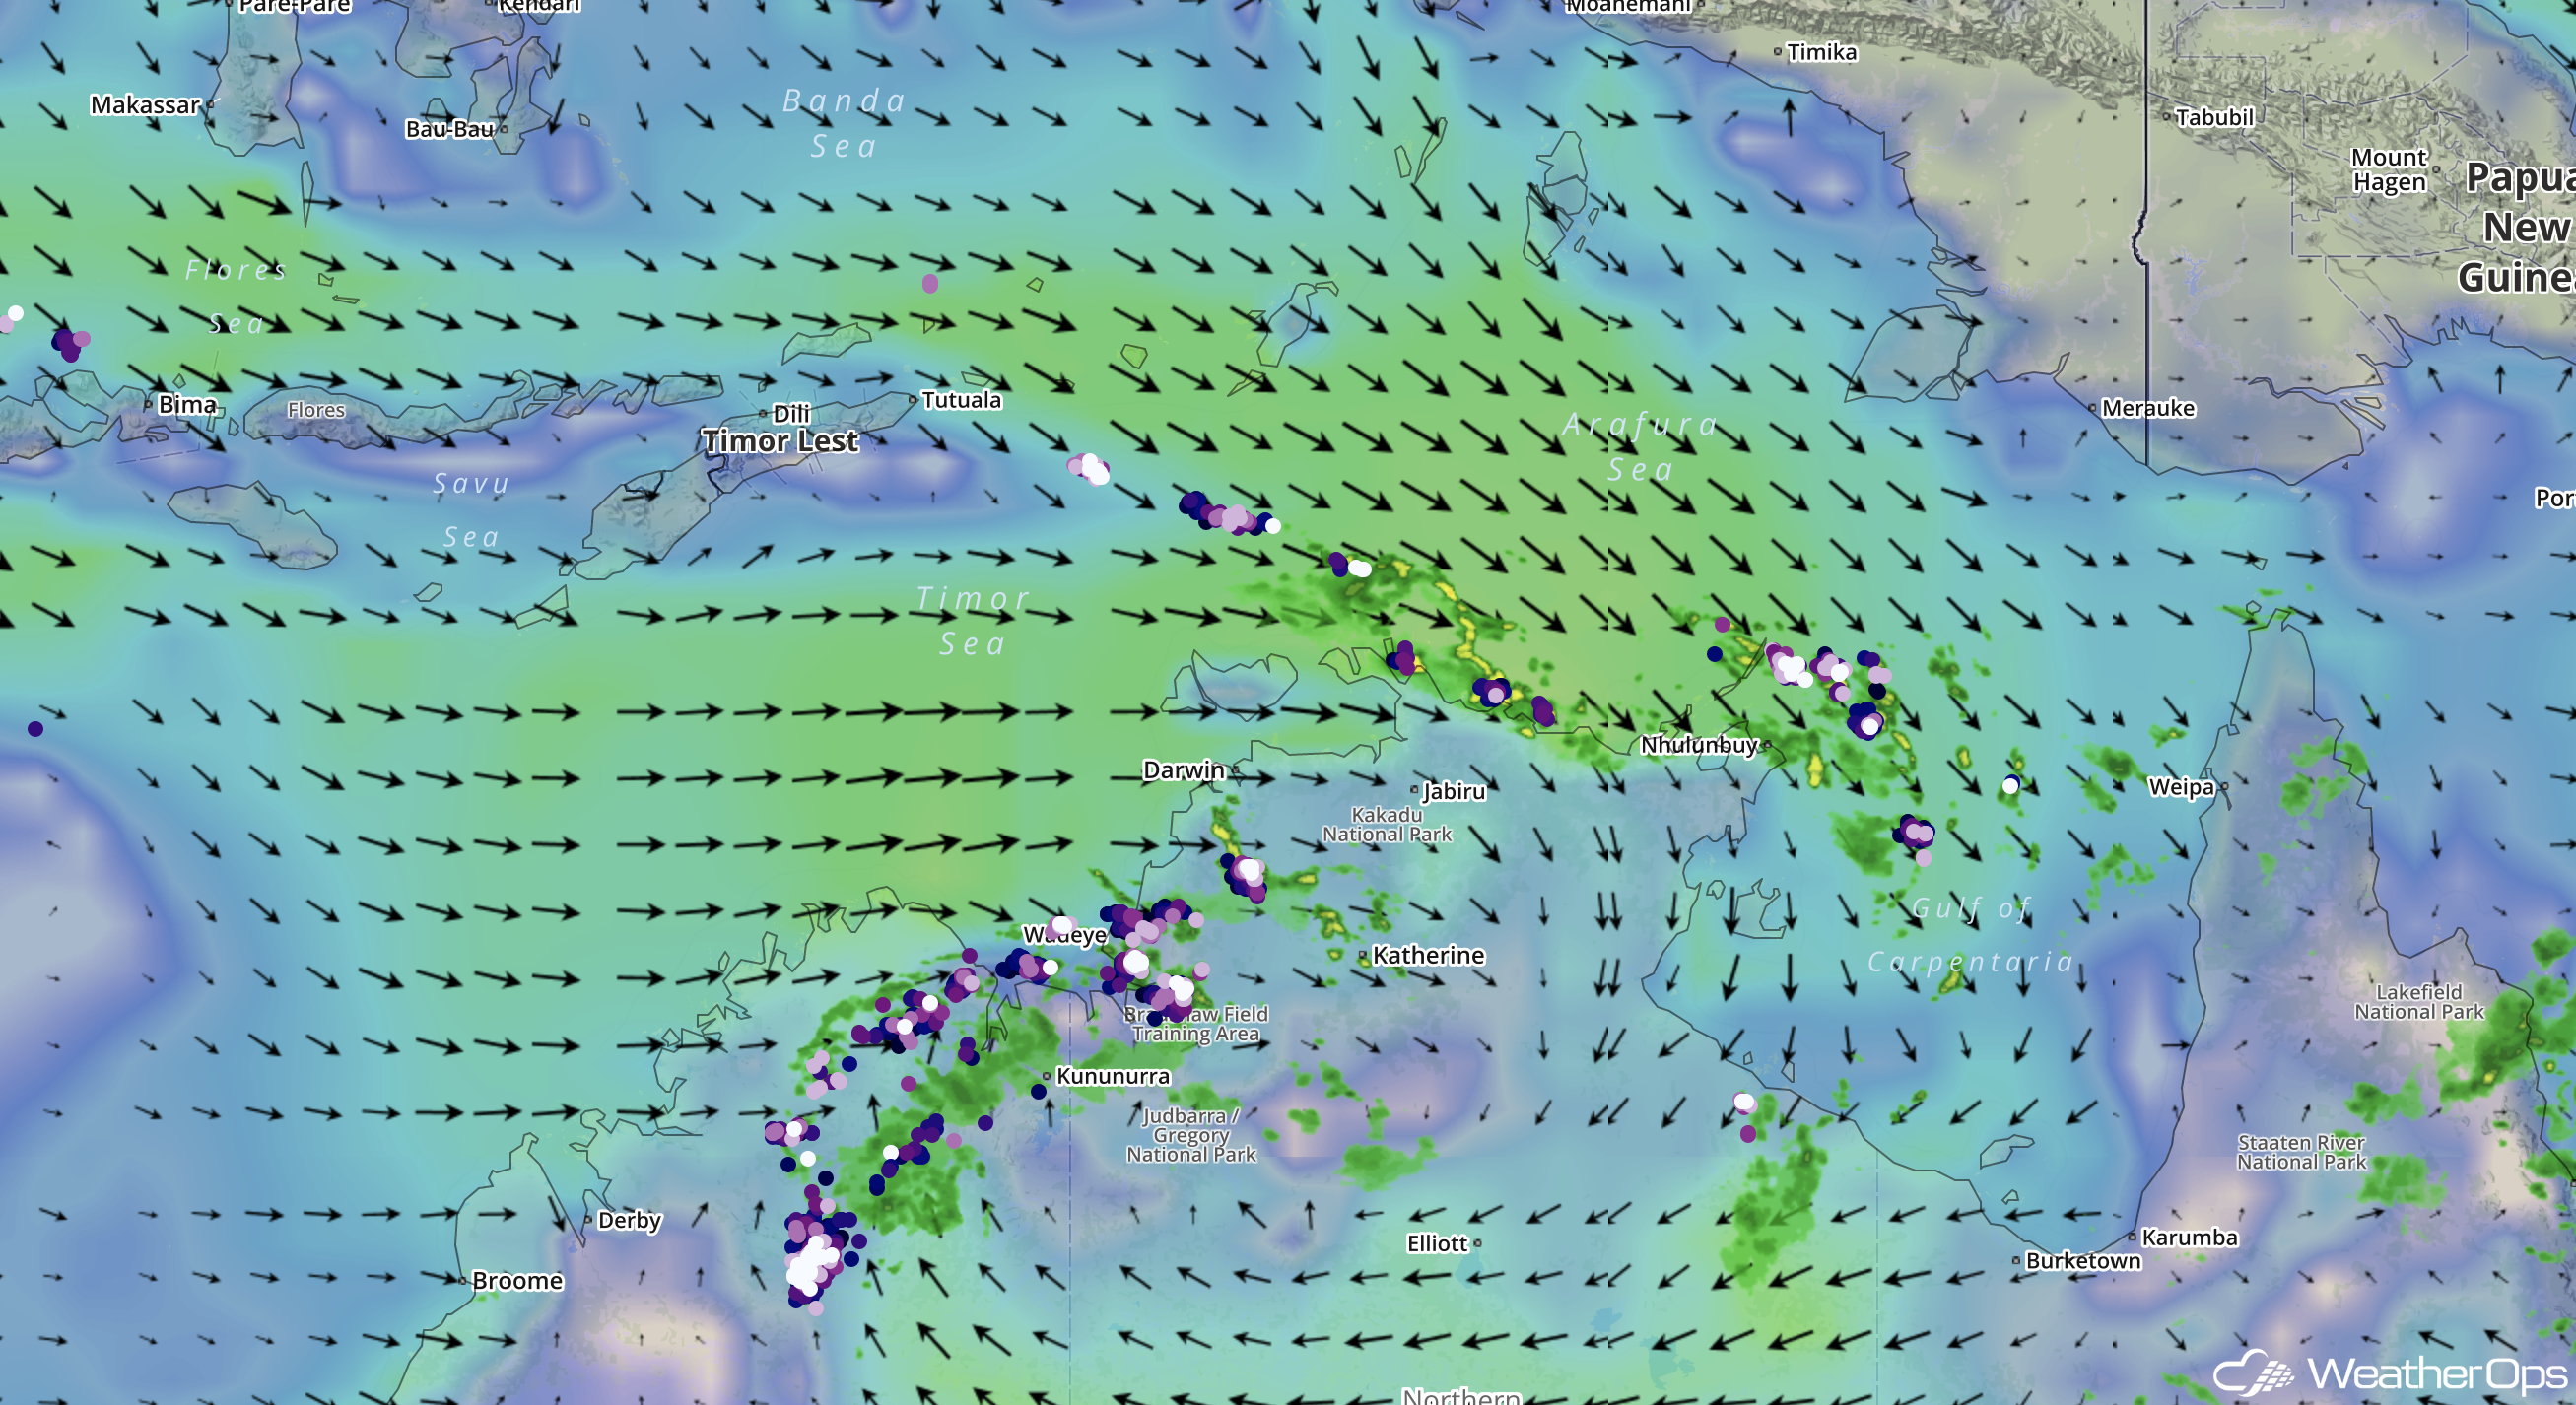 WeatherOps Surface Winds & Convective Activity over northern Australia